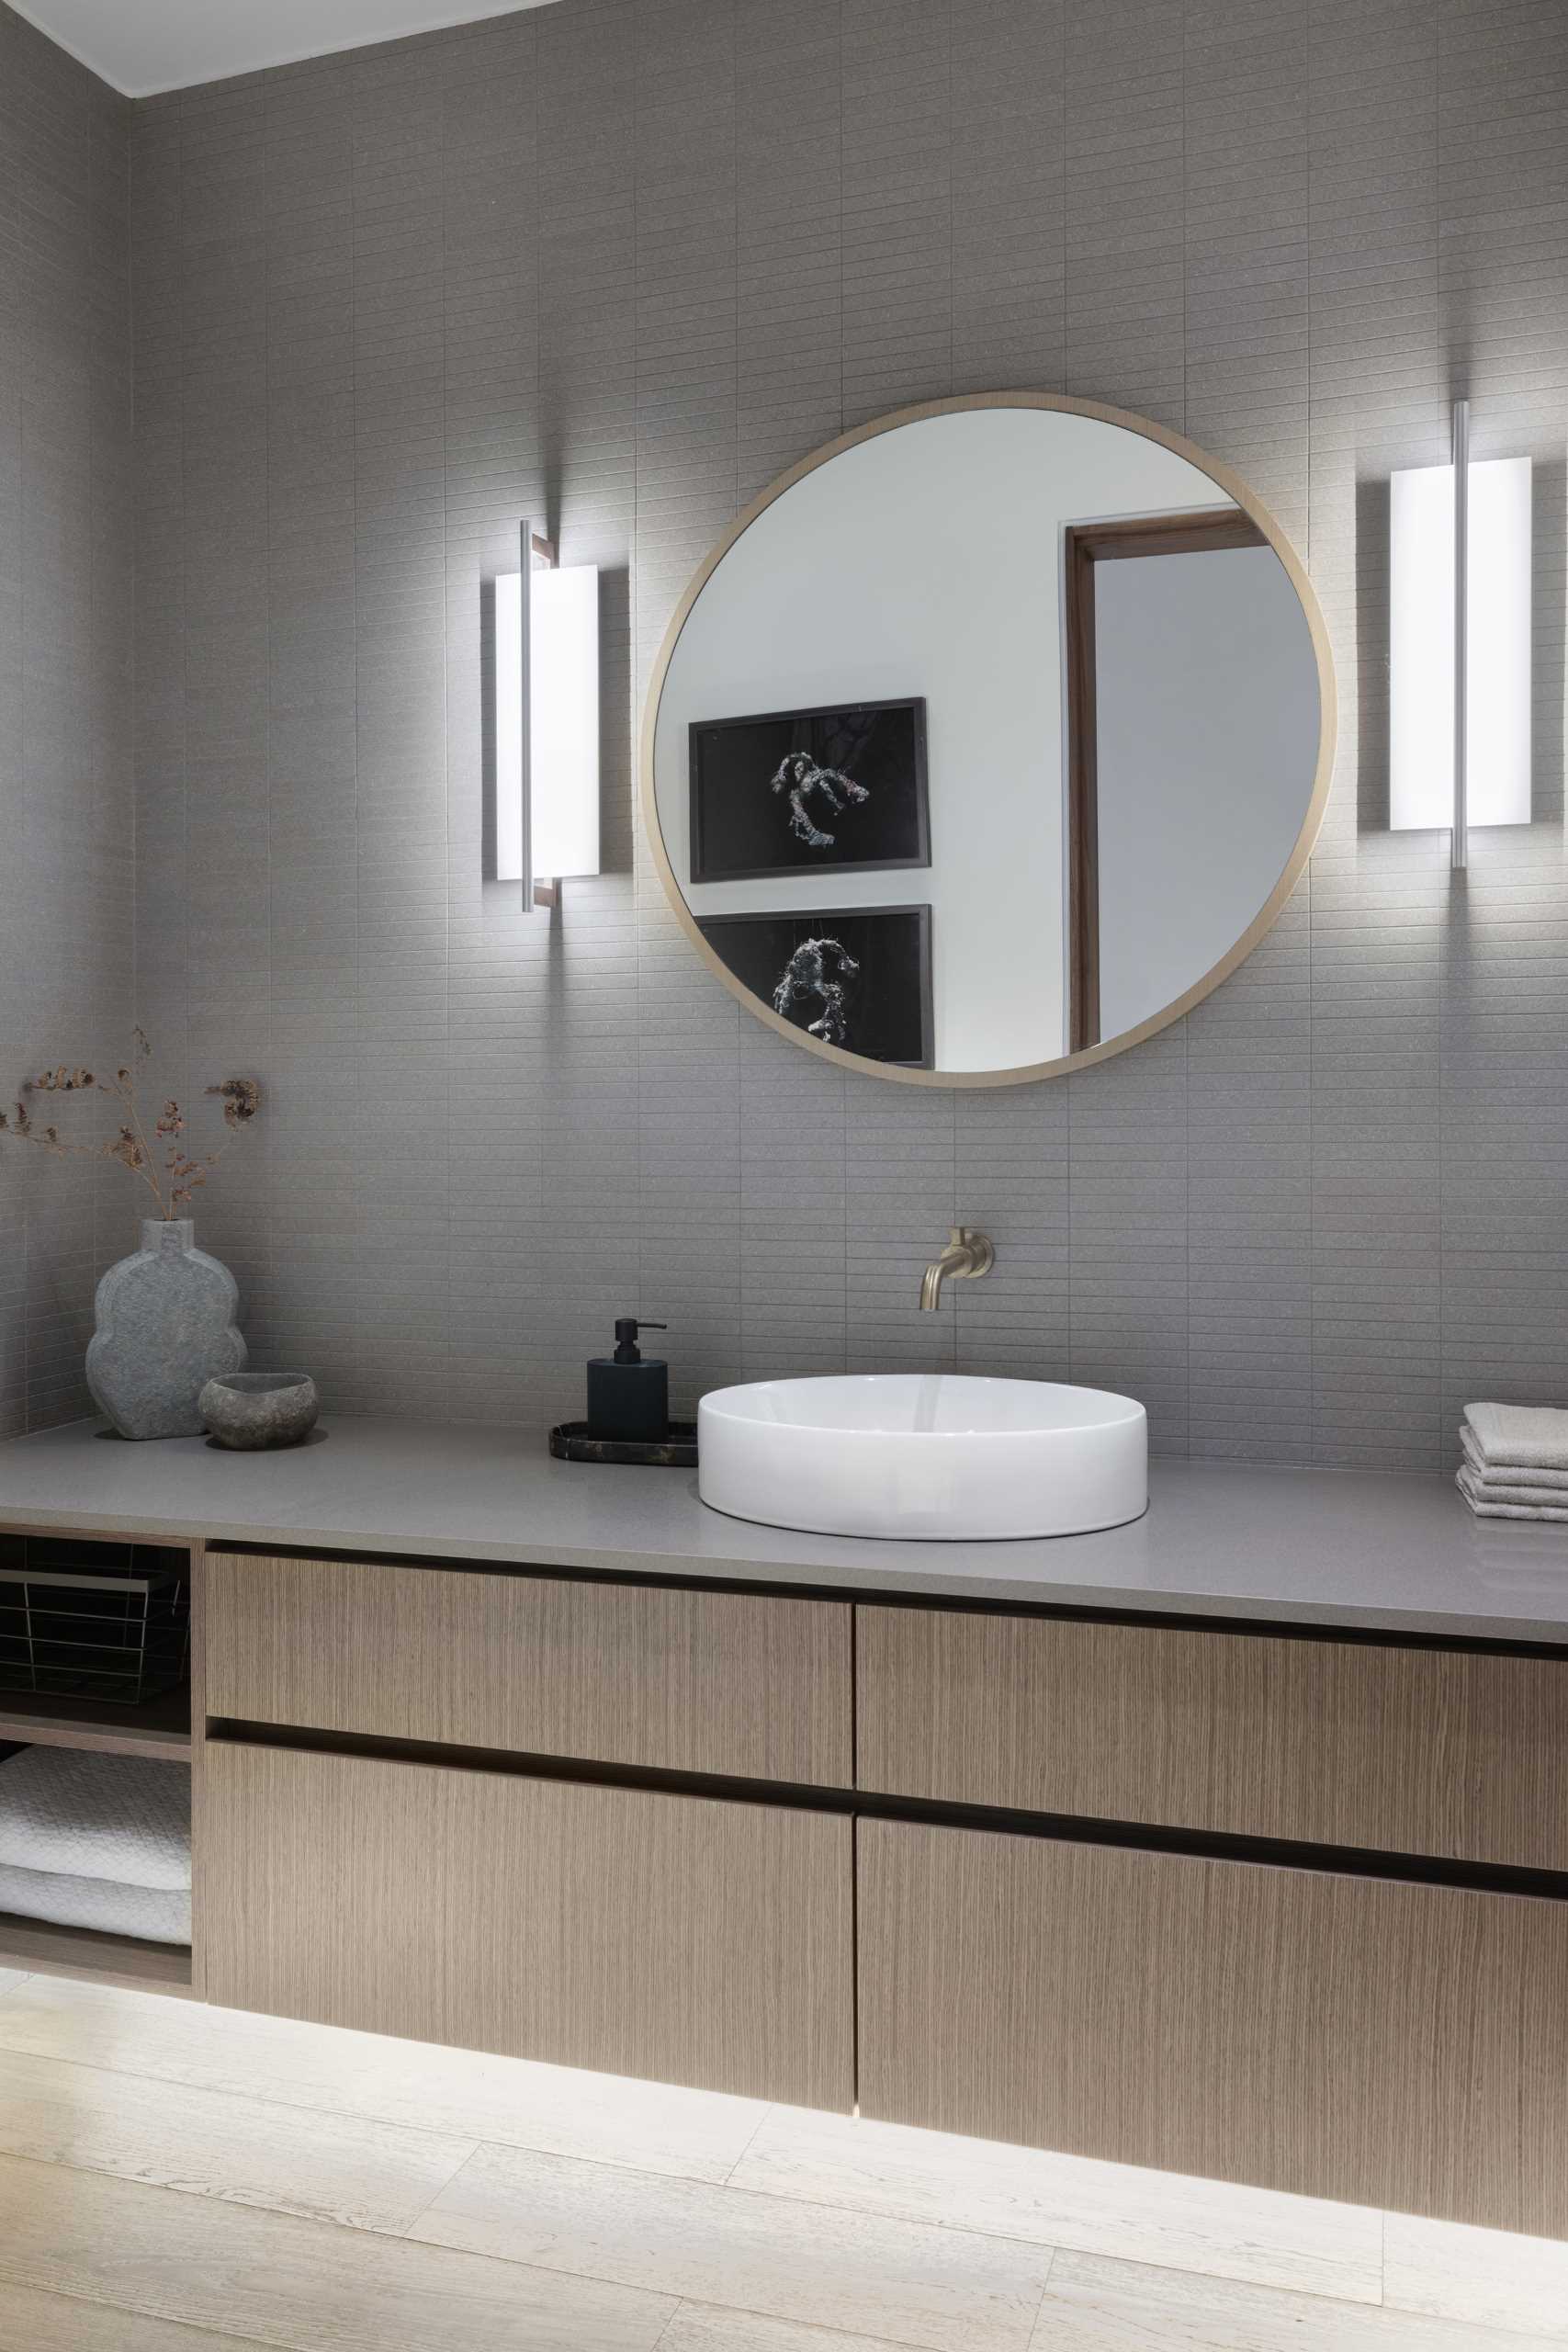 A modern bathroom with grey tiles, a wood vanity, and round mirror.